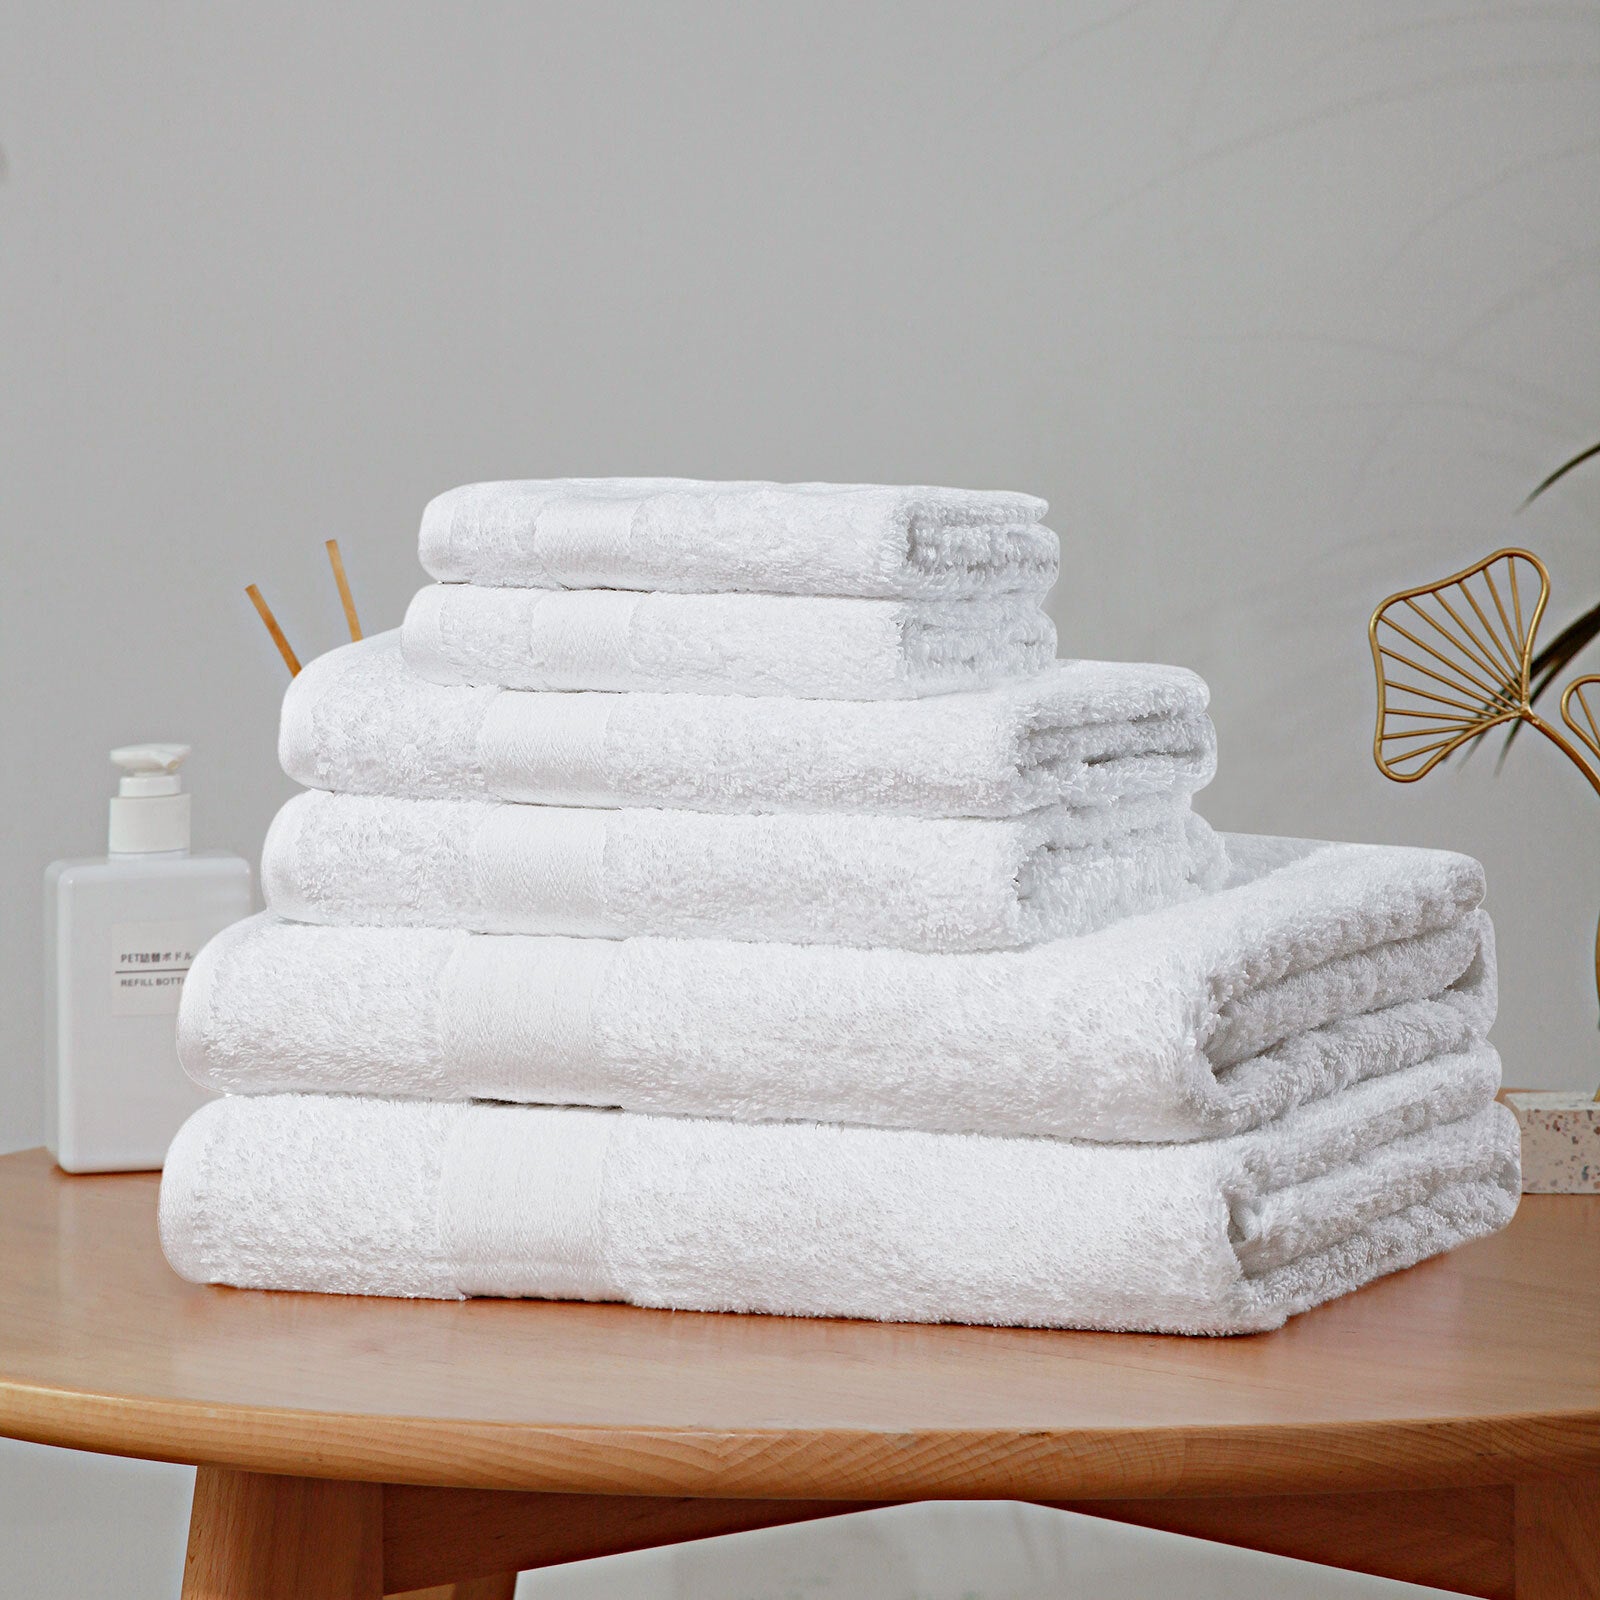 Luxury 6 Piece Soft and Absorbent Cotton Bath Towel Set - White - 0